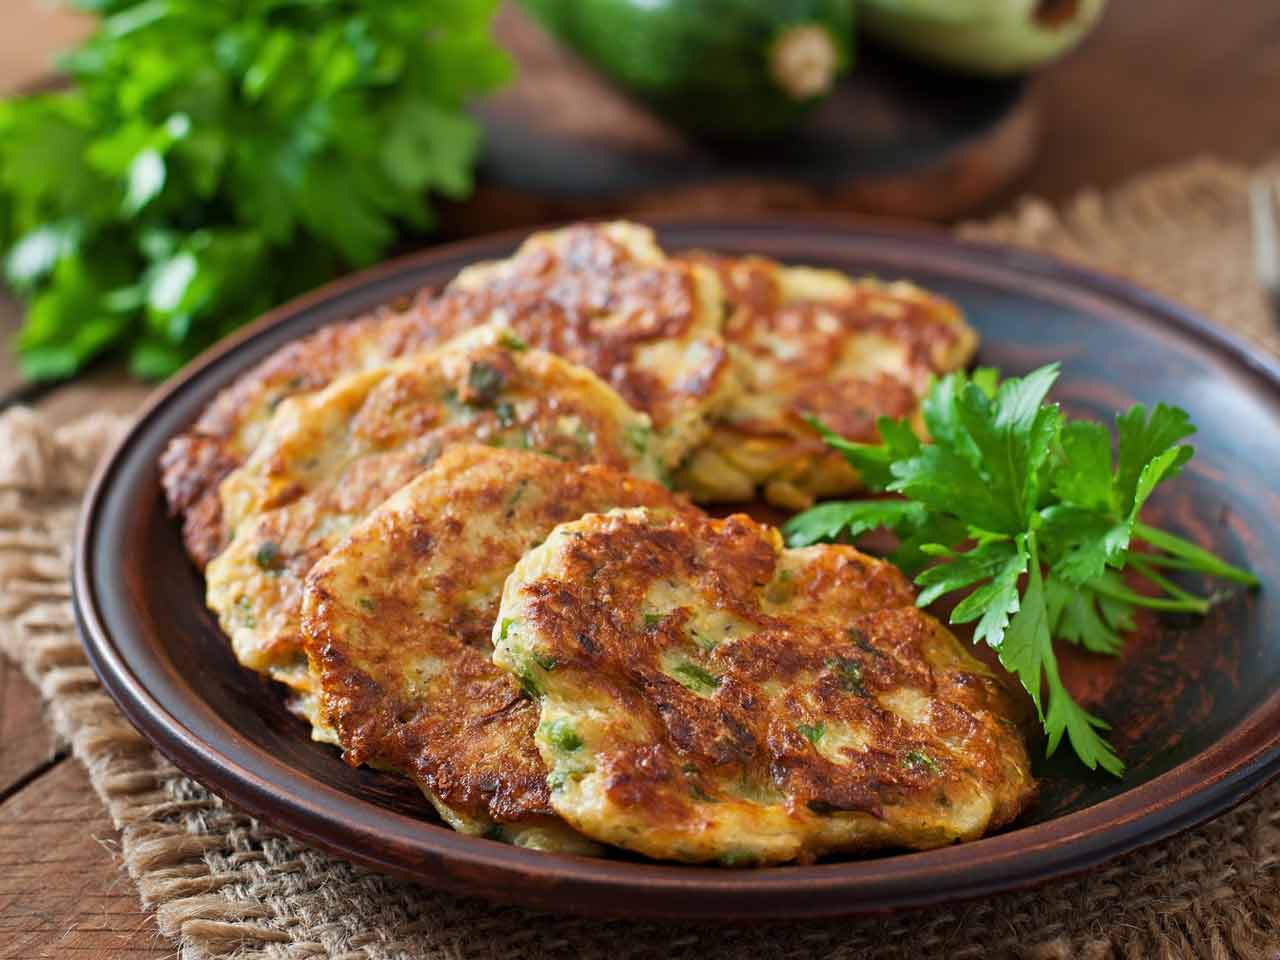 Courgette and feta fritters